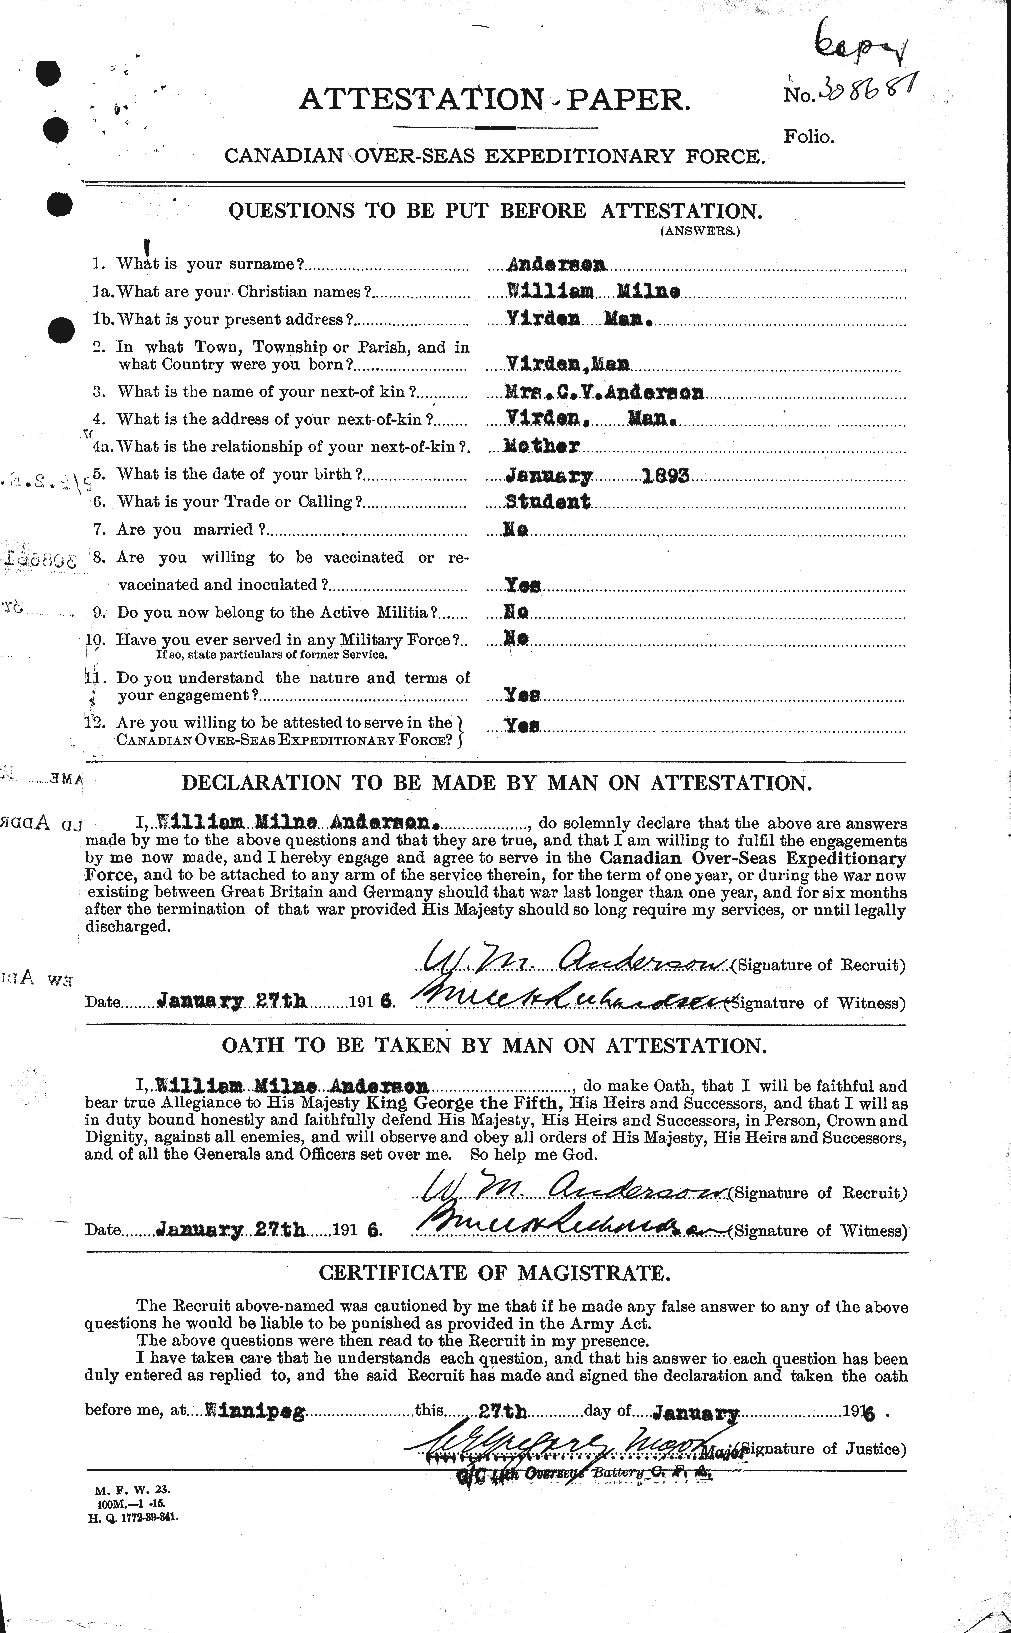 Personnel Records of the First World War - CEF 210681a